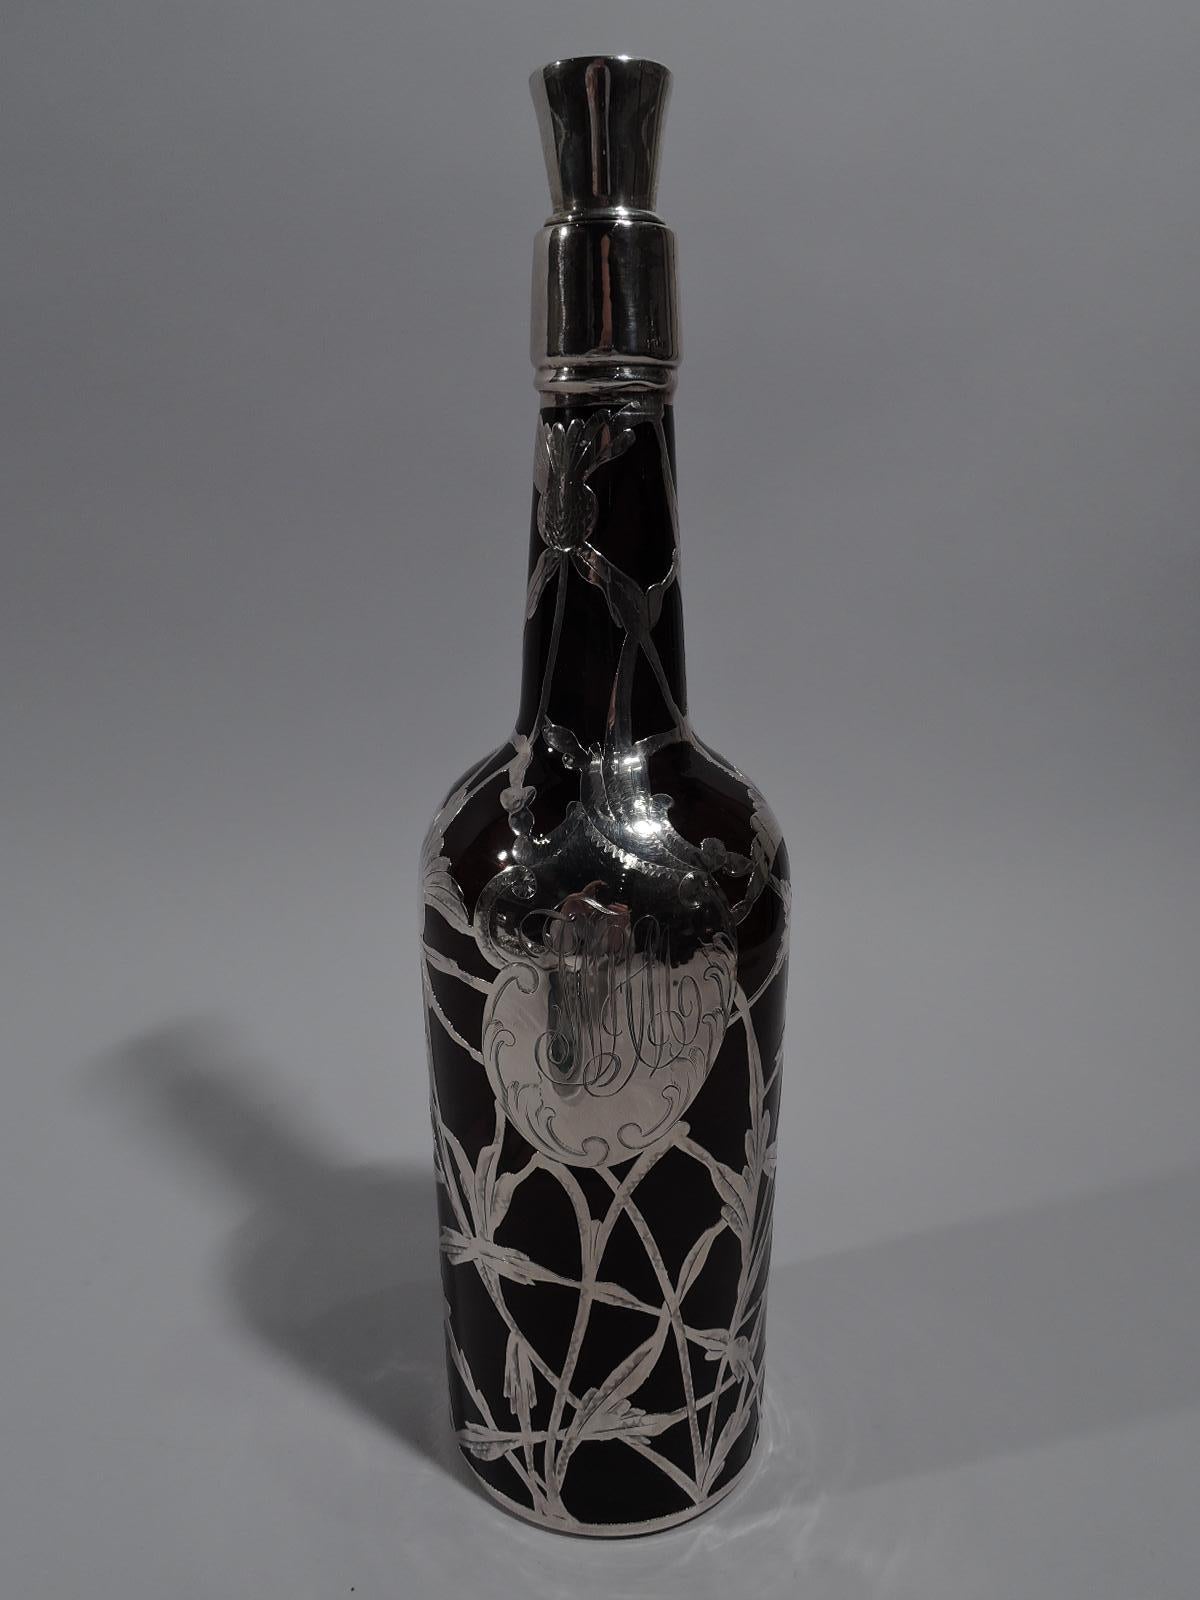 Art Nouveau amber glass whiskey bottle decanter with silver overlay, circa 1900. Traditional cylindrical form with sloping shoulder and upward tapering neck. Open and interlaced silver overlay with thistle ornament and asymmetrical cartouche with